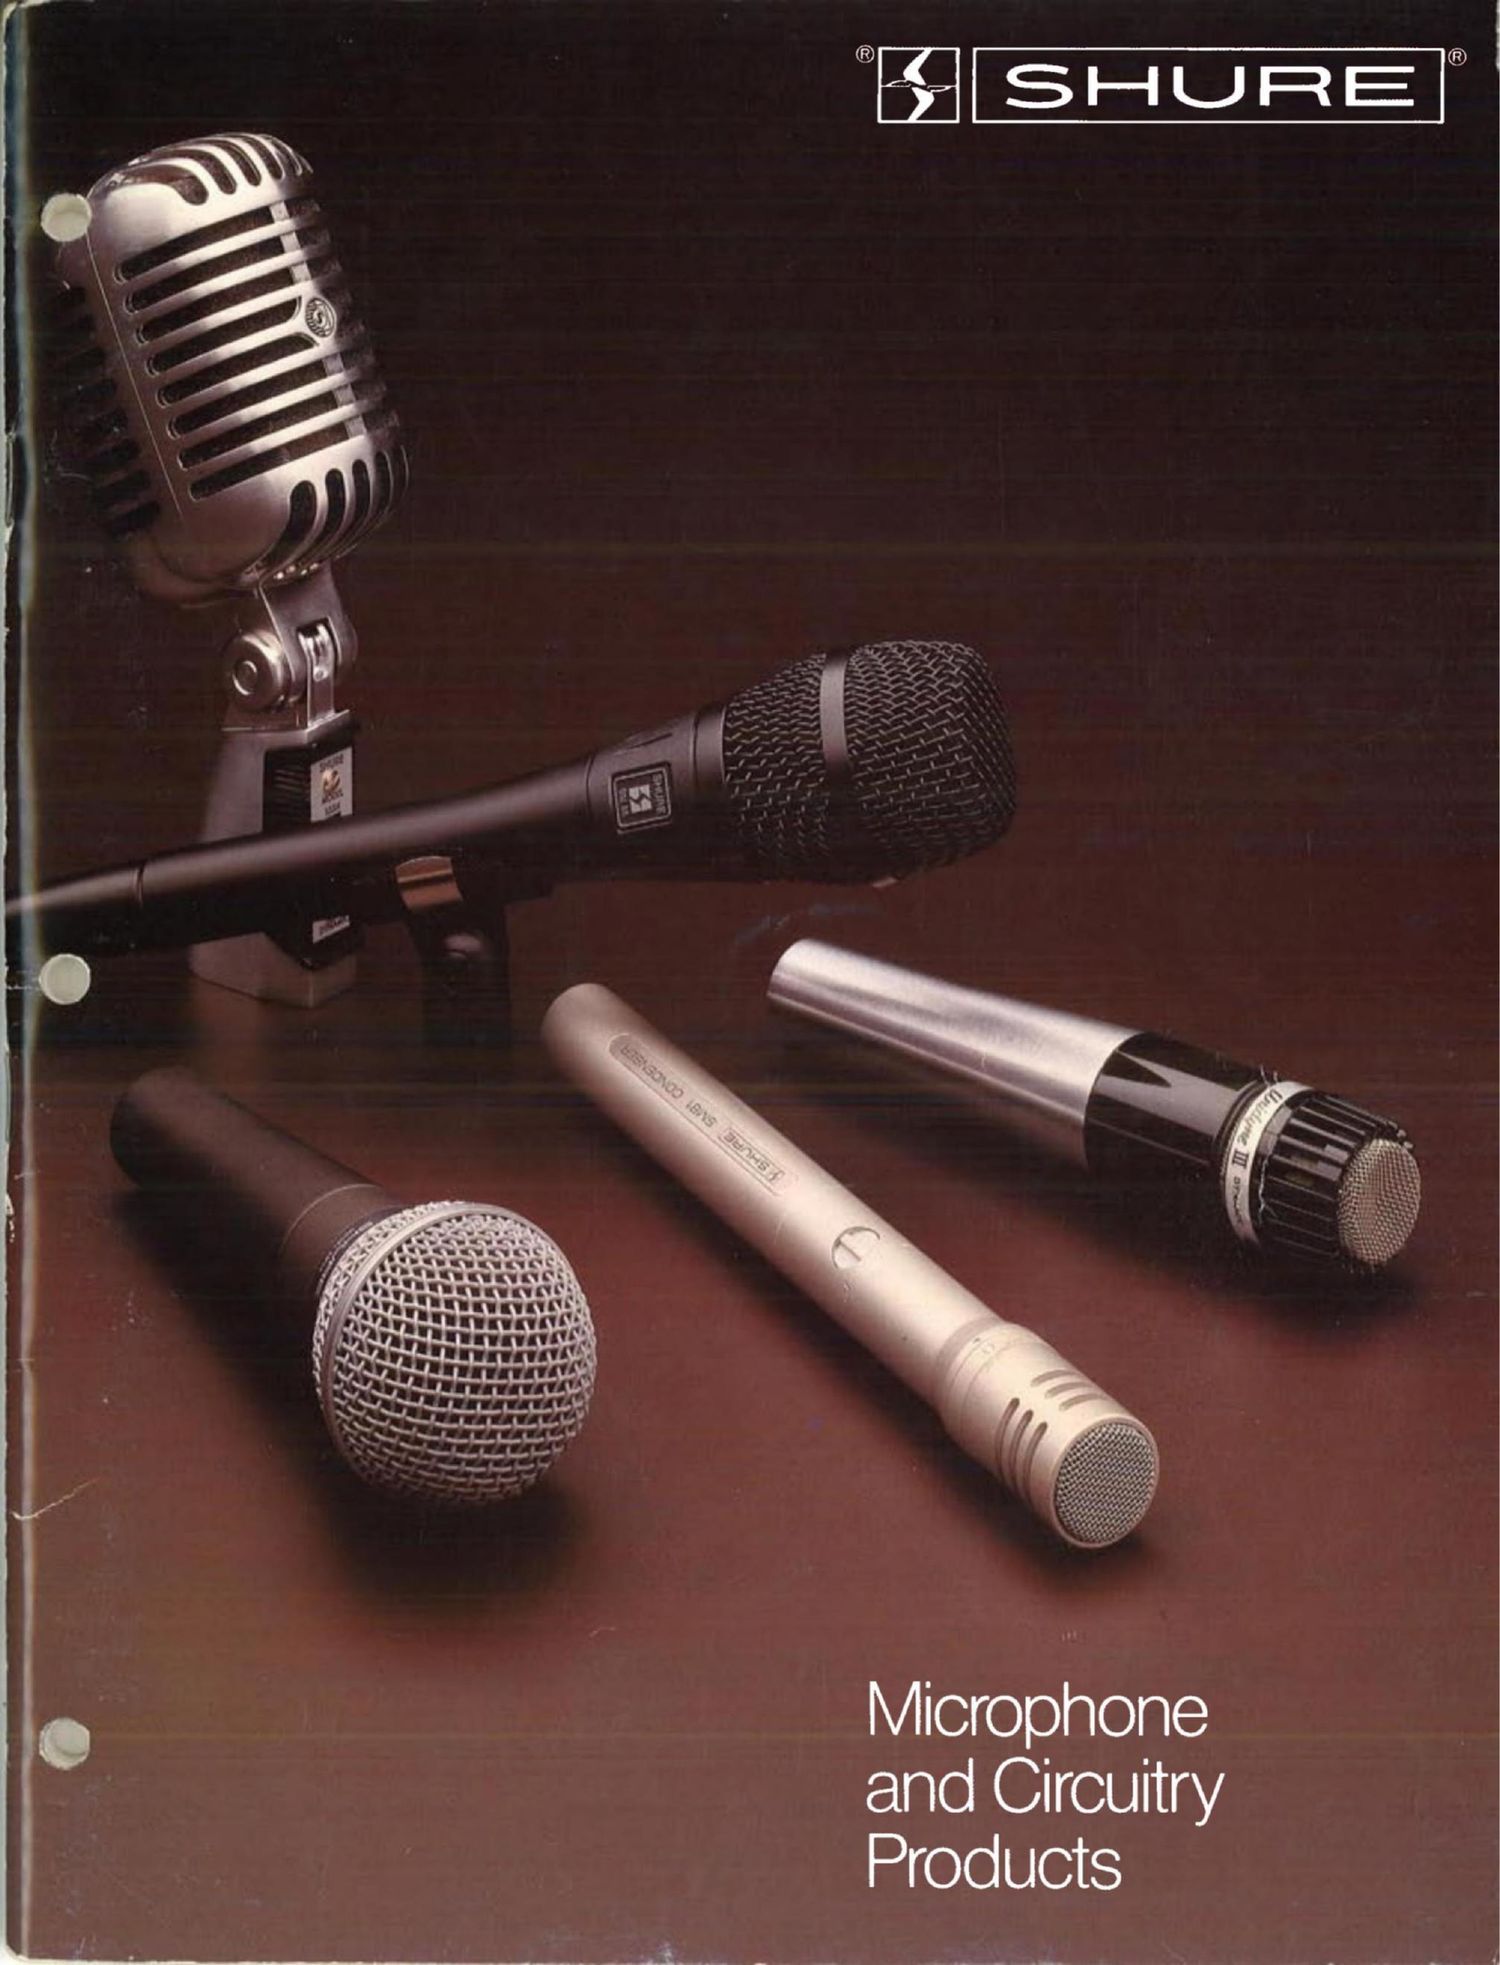 shure 1982 catalogue microphone circuitry products